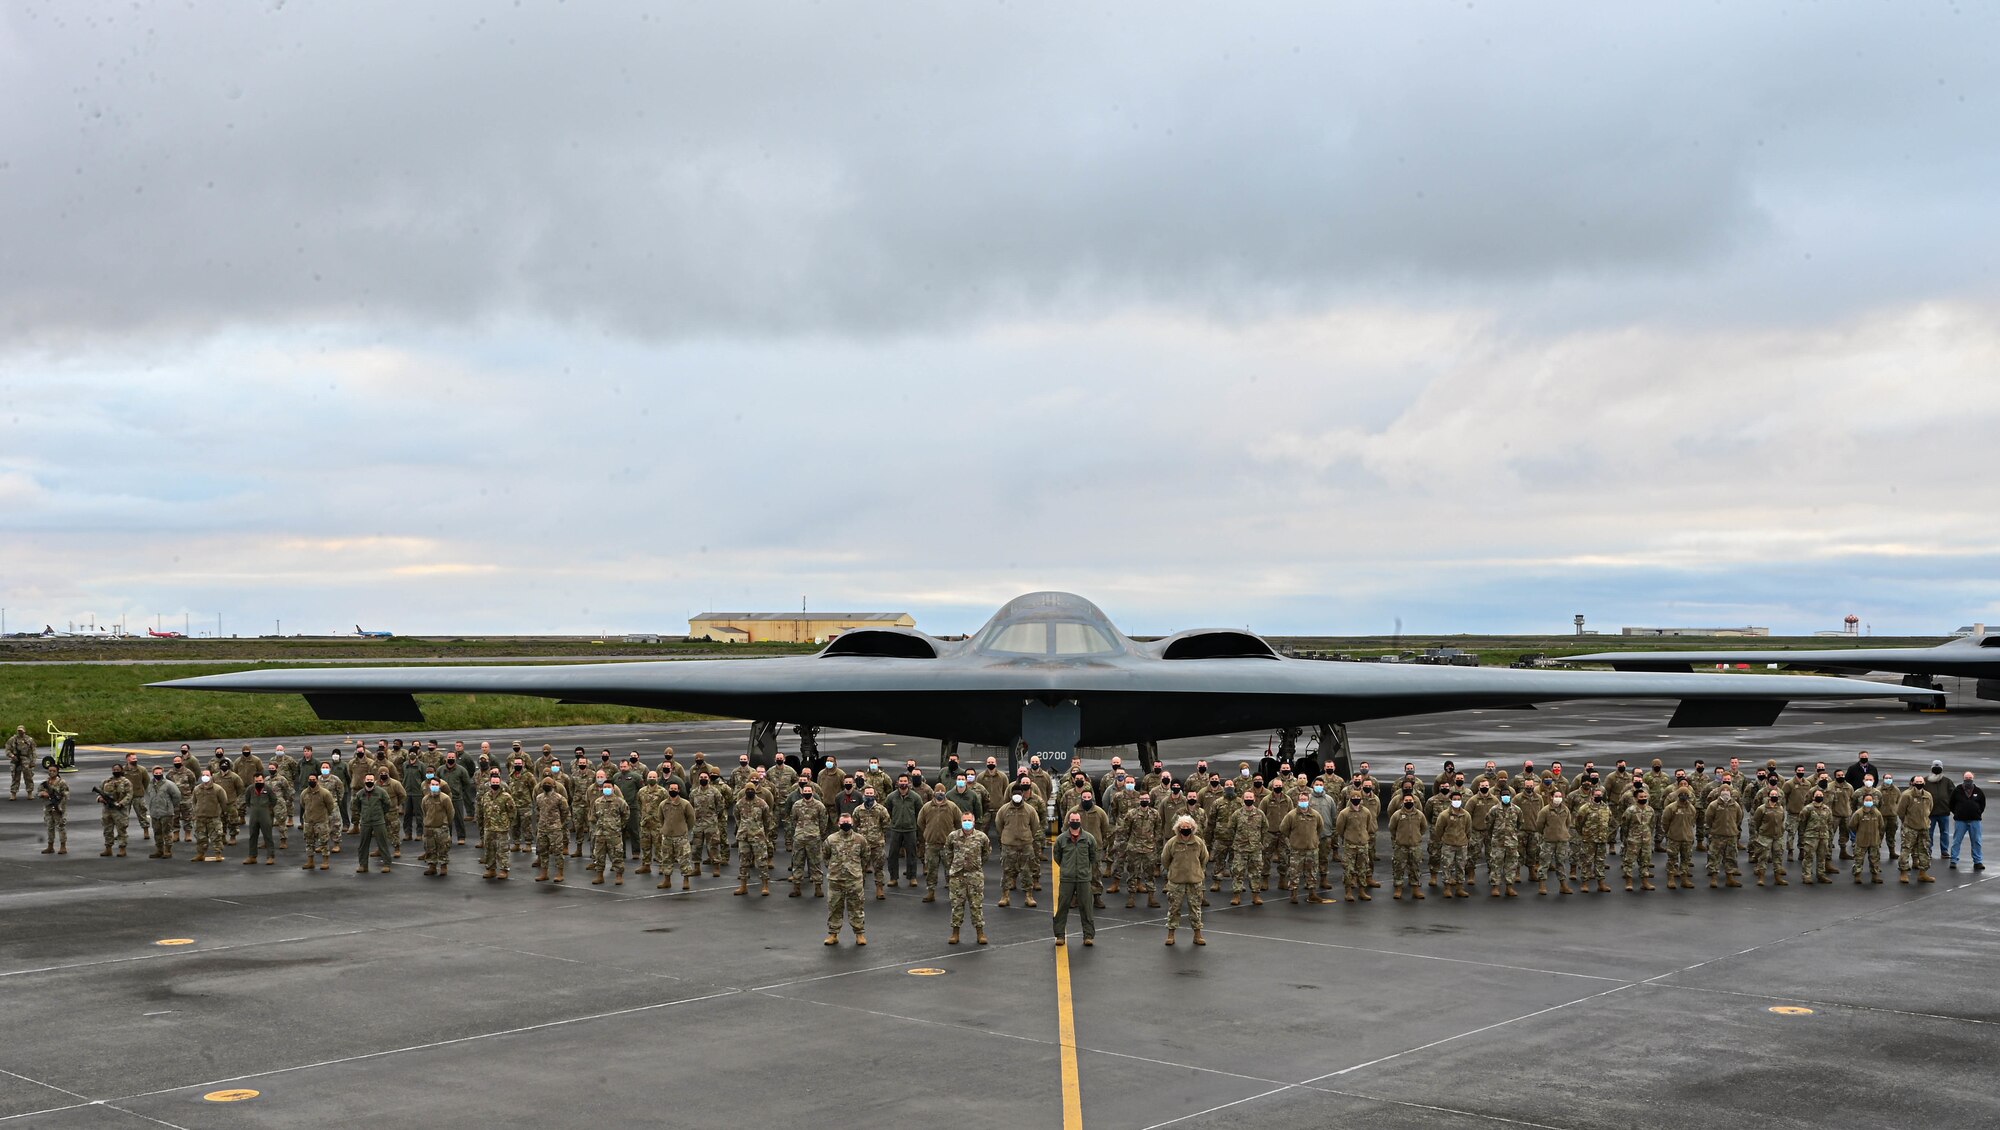 Airmen assigned to the 110th Expeditionary Bomb Squadron deploy three B-2 Spirit stealth bombers to Keflavik Air Base, Iceland, Sept. 7, 2021. Stealth bombers routinely operate across the globe to remain flexible and agile to respond to the changes in the operational environment. (U.S. Air Force photo by Airman 1st Class Victoria Hommel)